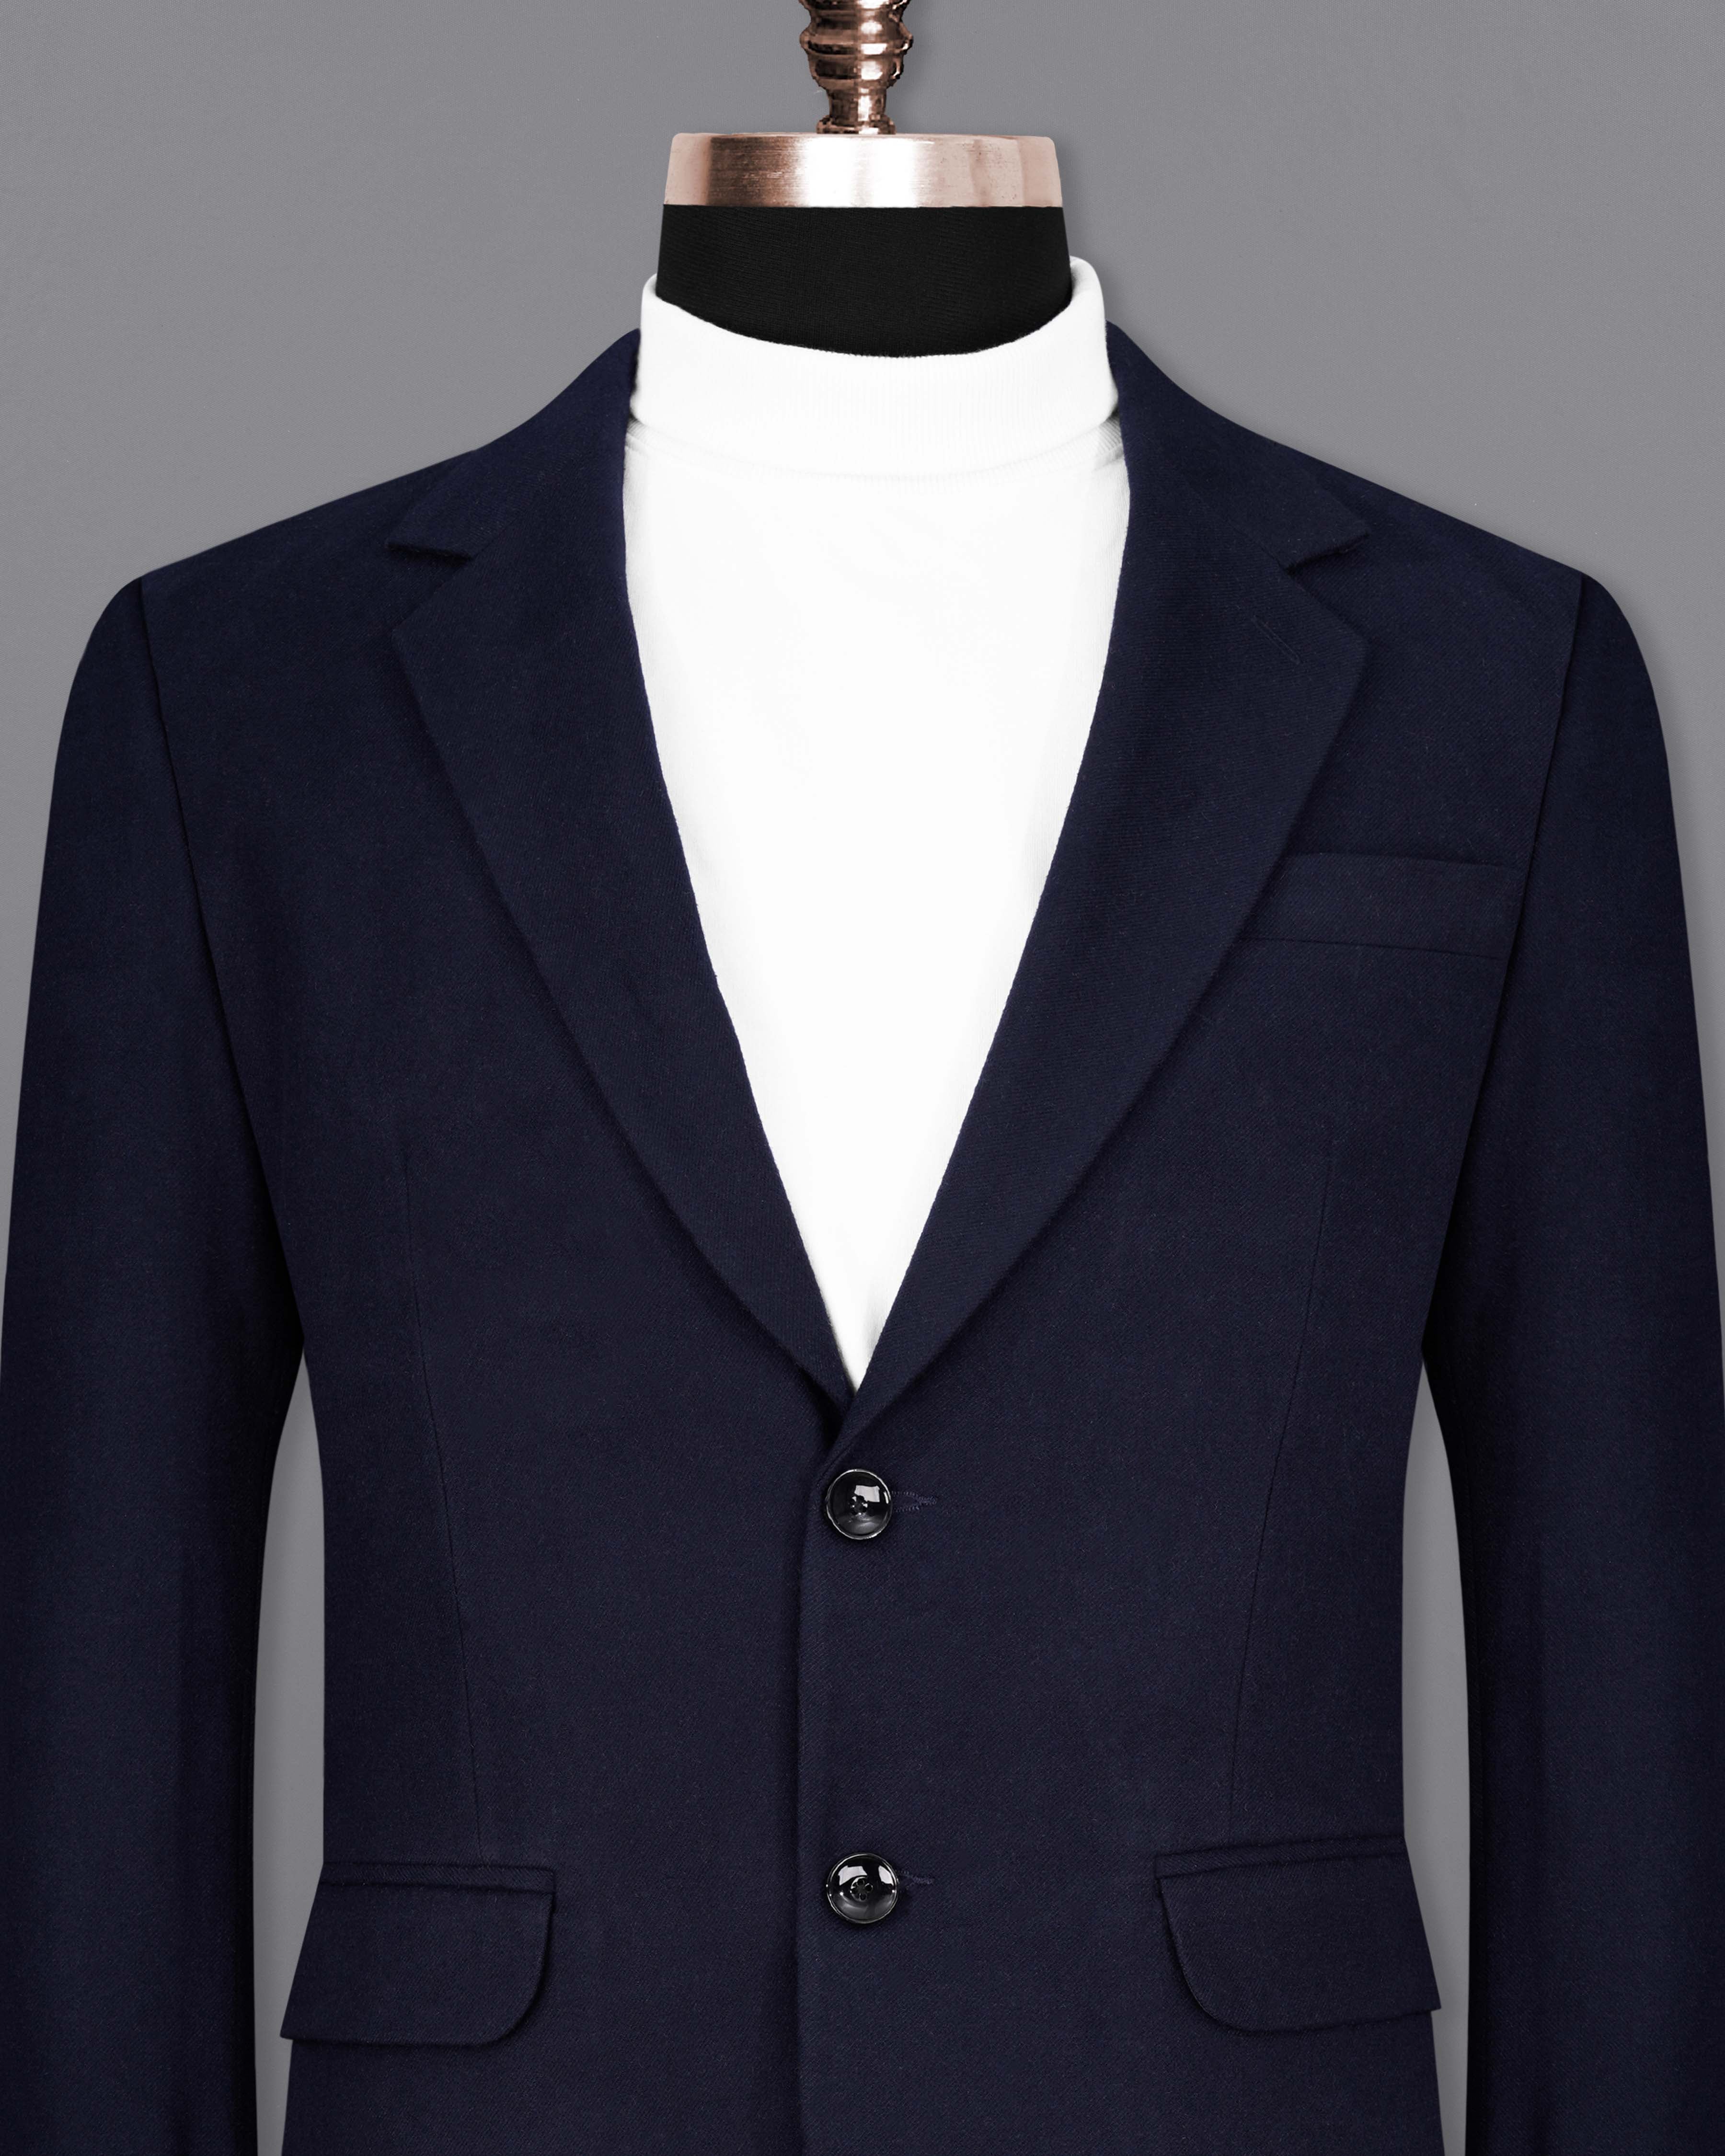 Mirage Blue Pure Wool Single Breasted Blazer BL2071-SB-36, BL2071-SB-38, BL2071-SB-40, BL2071-SB-42, BL2071-SB-44, BL2071-SB-46, BL2071-SB-48, BL2071-SB-50, BL2071-SB-52, BL2071-SB-54, BL2071-SB-56, BL2071-SB-58, BL2071-SB-60